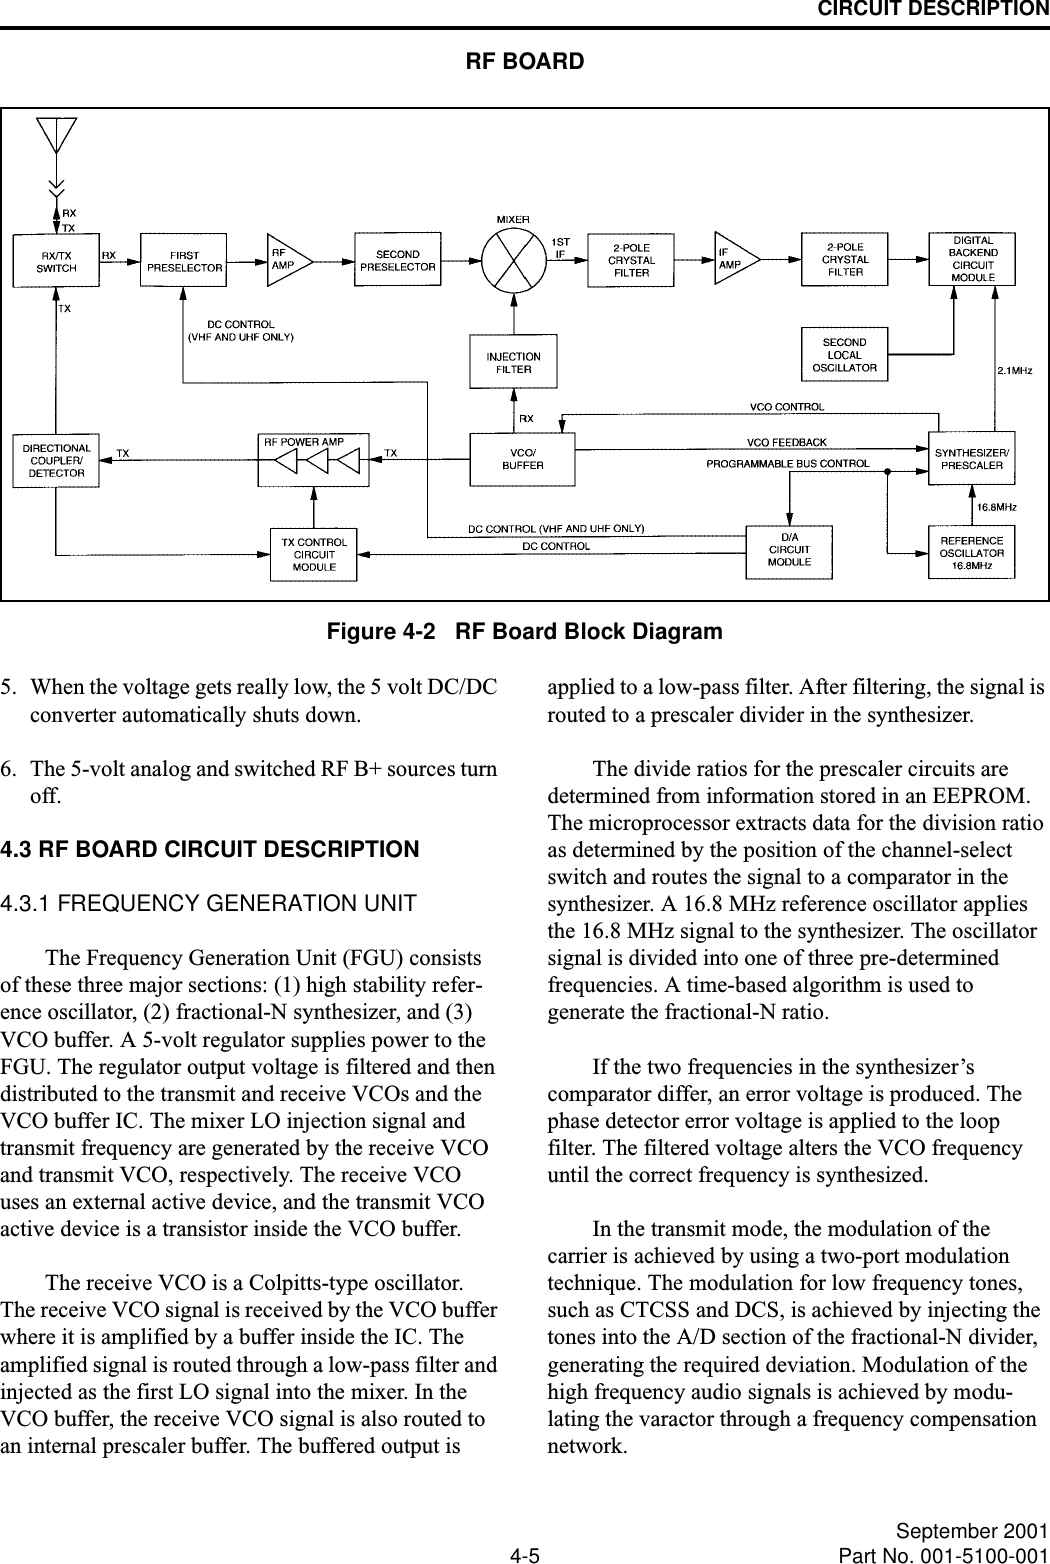 CIRCUIT DESCRIPTION4-5 September 2001Part No. 001-5100-001Figure 4-2   RF Board Block Diagram5. When the voltage gets really low, the 5 volt DC/DC converter automatically shuts down.6. The 5-volt analog and switched RF B+ sources turn off.4.3 RF BOARD CIRCUIT DESCRIPTION4.3.1 FREQUENCY GENERATION UNITThe Frequency Generation Unit (FGU) consists of these three major sections: (1) high stability refer-ence oscillator, (2) fractional-N synthesizer, and (3) VCO buffer. A 5-volt regulator supplies power to the FGU. The regulator output voltage is filtered and then distributed to the transmit and receive VCOs and the VCO buffer IC. The mixer LO injection signal and transmit frequency are generated by the receive VCO and transmit VCO, respectively. The receive VCO uses an external active device, and the transmit VCO active device is a transistor inside the VCO buffer. The receive VCO is a Colpitts-type oscillator. The receive VCO signal is received by the VCO buffer where it is amplified by a buffer inside the IC. The amplified signal is routed through a low-pass filter and injected as the first LO signal into the mixer. In the VCO buffer, the receive VCO signal is also routed to an internal prescaler buffer. The buffered output is applied to a low-pass filter. After filtering, the signal is routed to a prescaler divider in the synthesizer.The divide ratios for the prescaler circuits are determined from information stored in an EEPROM. The microprocessor extracts data for the division ratio as determined by the position of the channel-select switch and routes the signal to a comparator in the synthesizer. A 16.8 MHz reference oscillator applies the 16.8 MHz signal to the synthesizer. The oscillator signal is divided into one of three pre-determined frequencies. A time-based algorithm is used to generate the fractional-N ratio.If the two frequencies in the synthesizer’s comparator differ, an error voltage is produced. The phase detector error voltage is applied to the loop filter. The filtered voltage alters the VCO frequency until the correct frequency is synthesized.In the transmit mode, the modulation of the carrier is achieved by using a two-port modulation technique. The modulation for low frequency tones, such as CTCSS and DCS, is achieved by injecting the tones into the A/D section of the fractional-N divider, generating the required deviation. Modulation of the high frequency audio signals is achieved by modu-lating the varactor through a frequency compensation network.RF BOARD